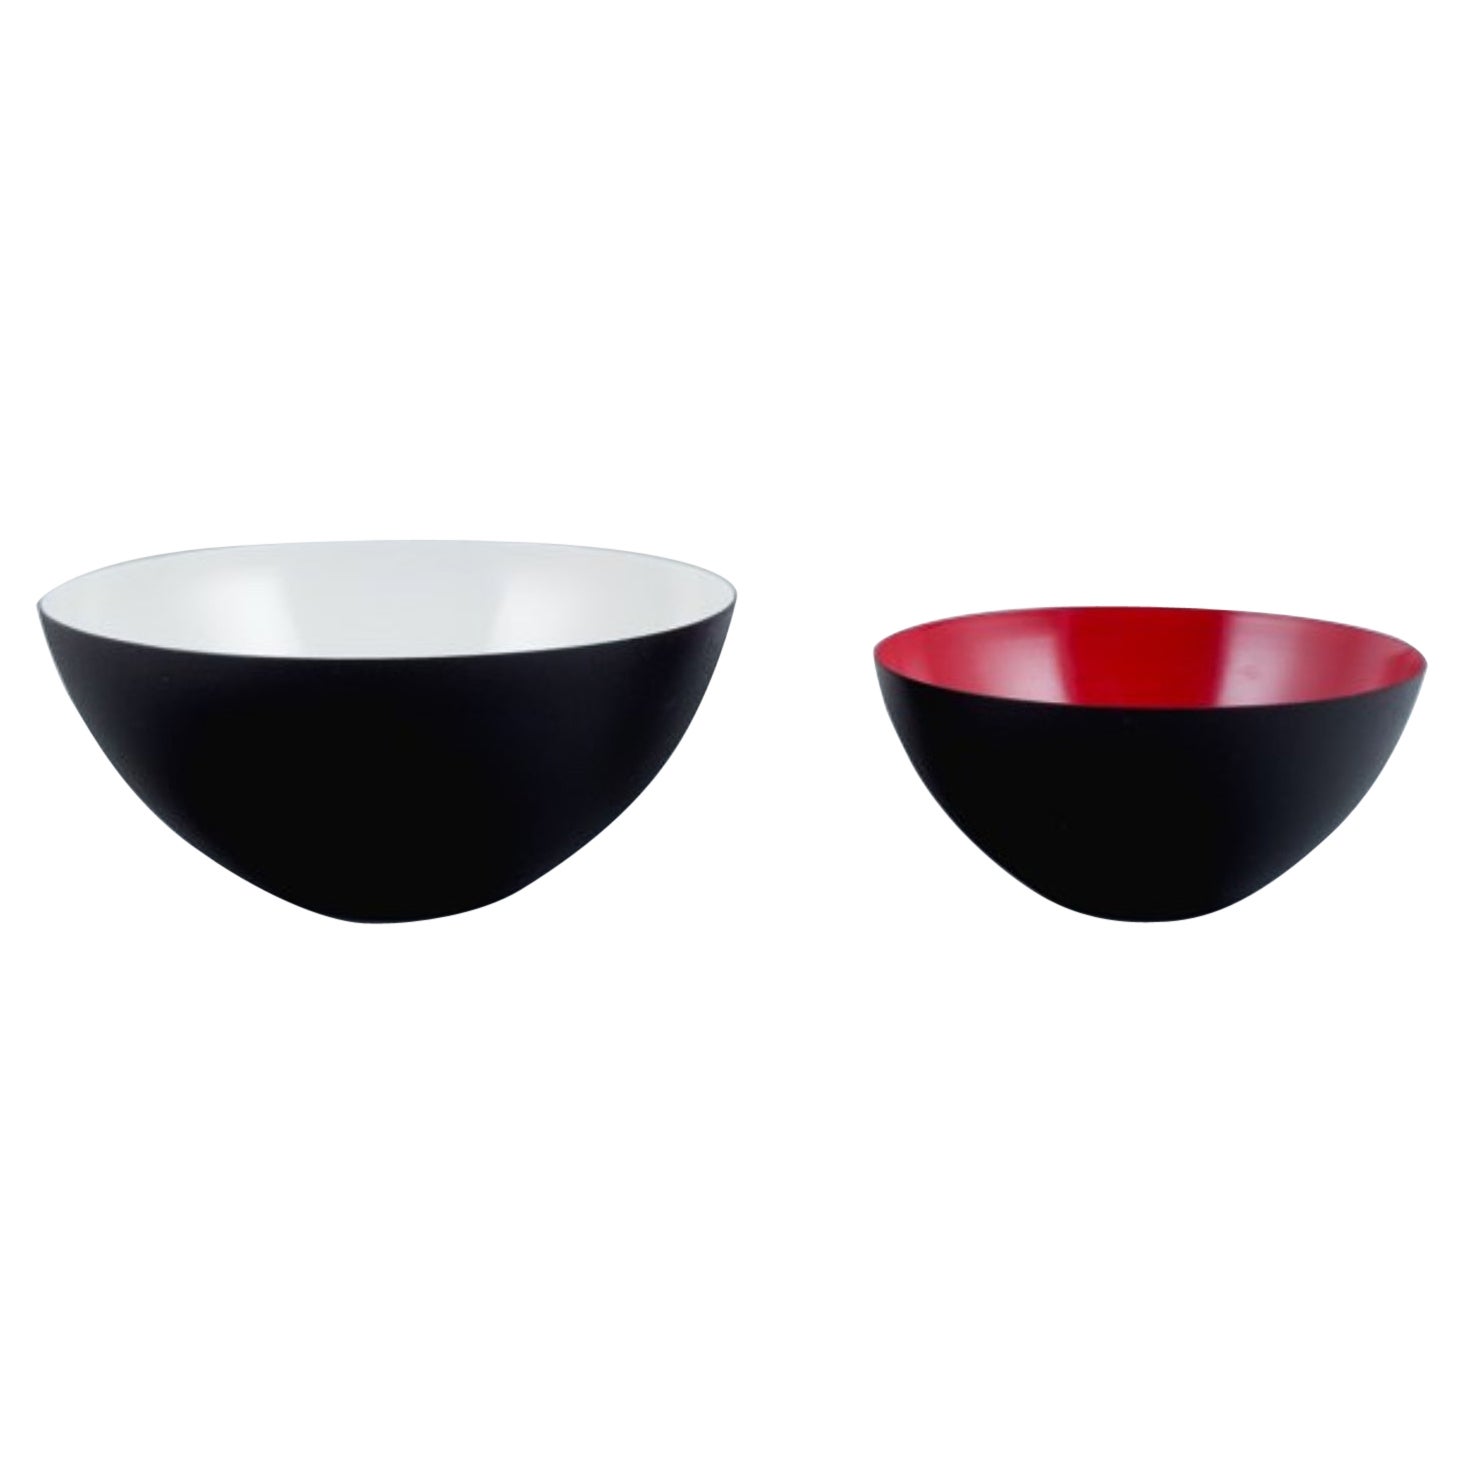 Two Krenit Bowls in Metal, White and Red, Designed by Hermann Krenchel, Denmark